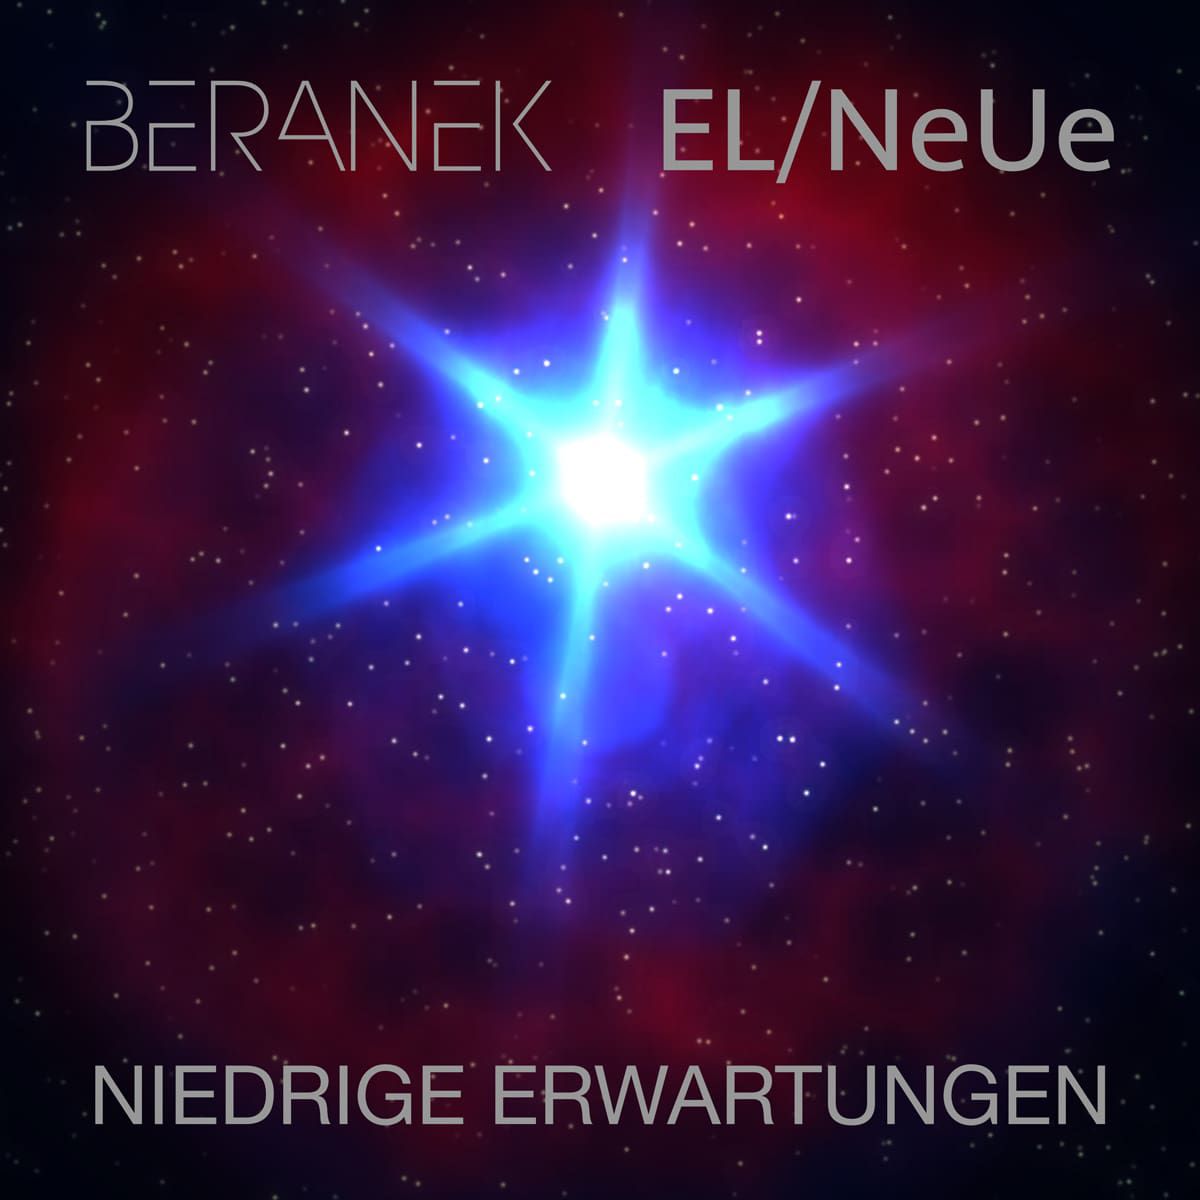 Norwegian electro bands El/NeUe and Beranek collaborate on new song for 10" vinyl and play at birthday party